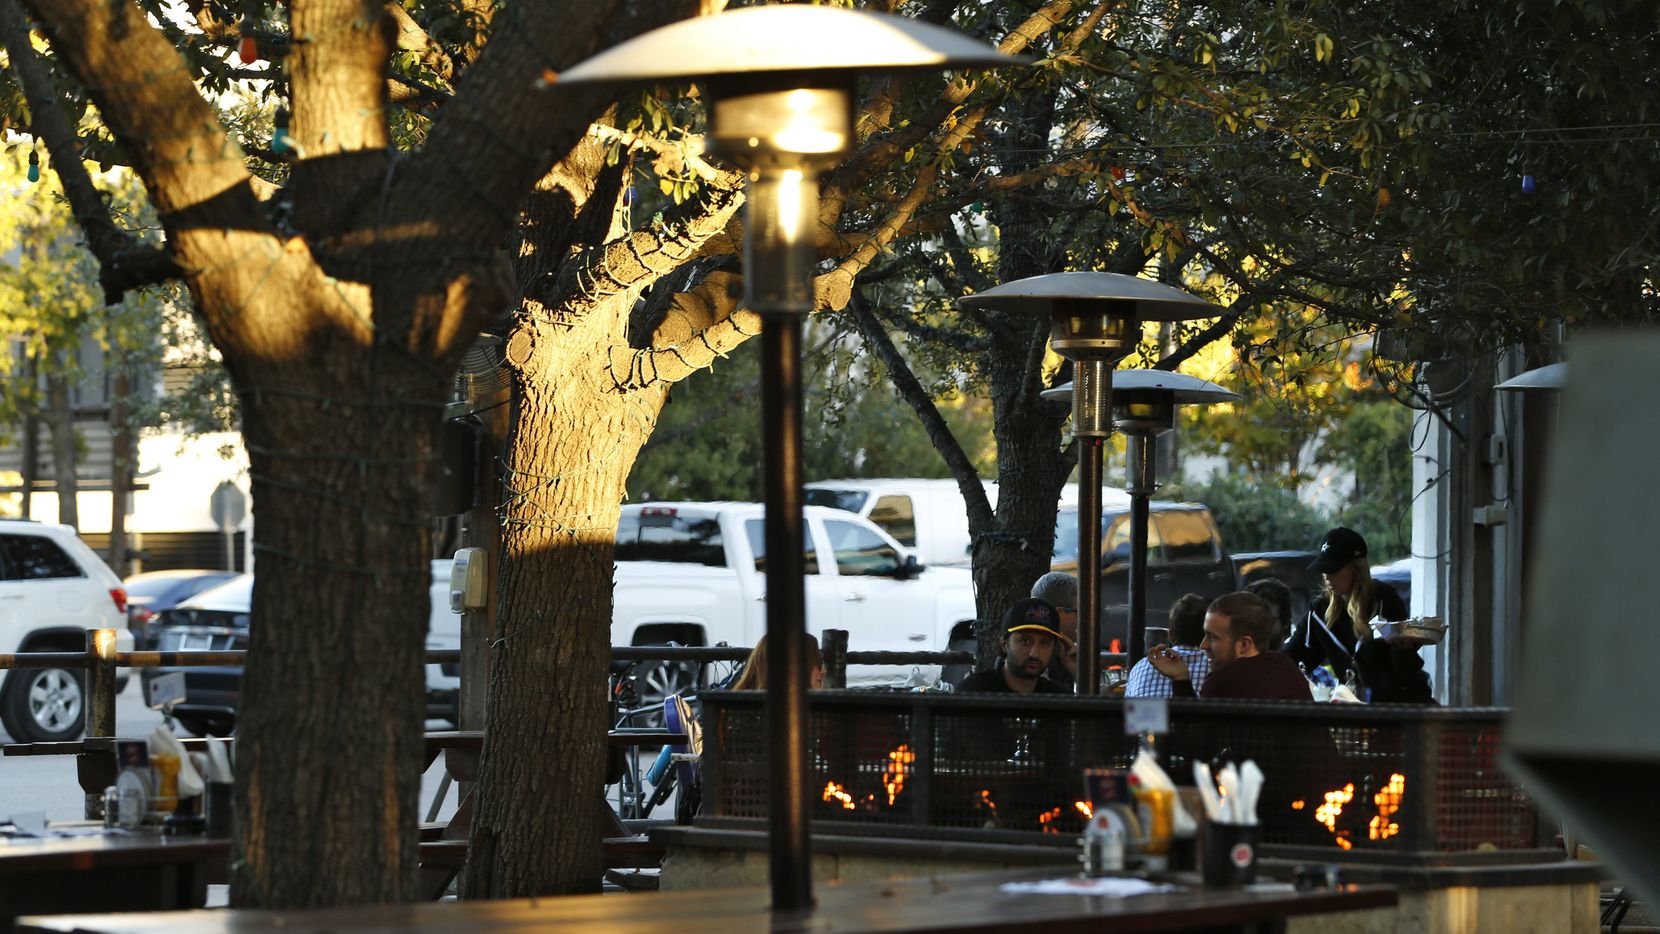 The patio looking into the parking lot of Katy Trail Ice House in Dallas on Nov. 29, 2016....